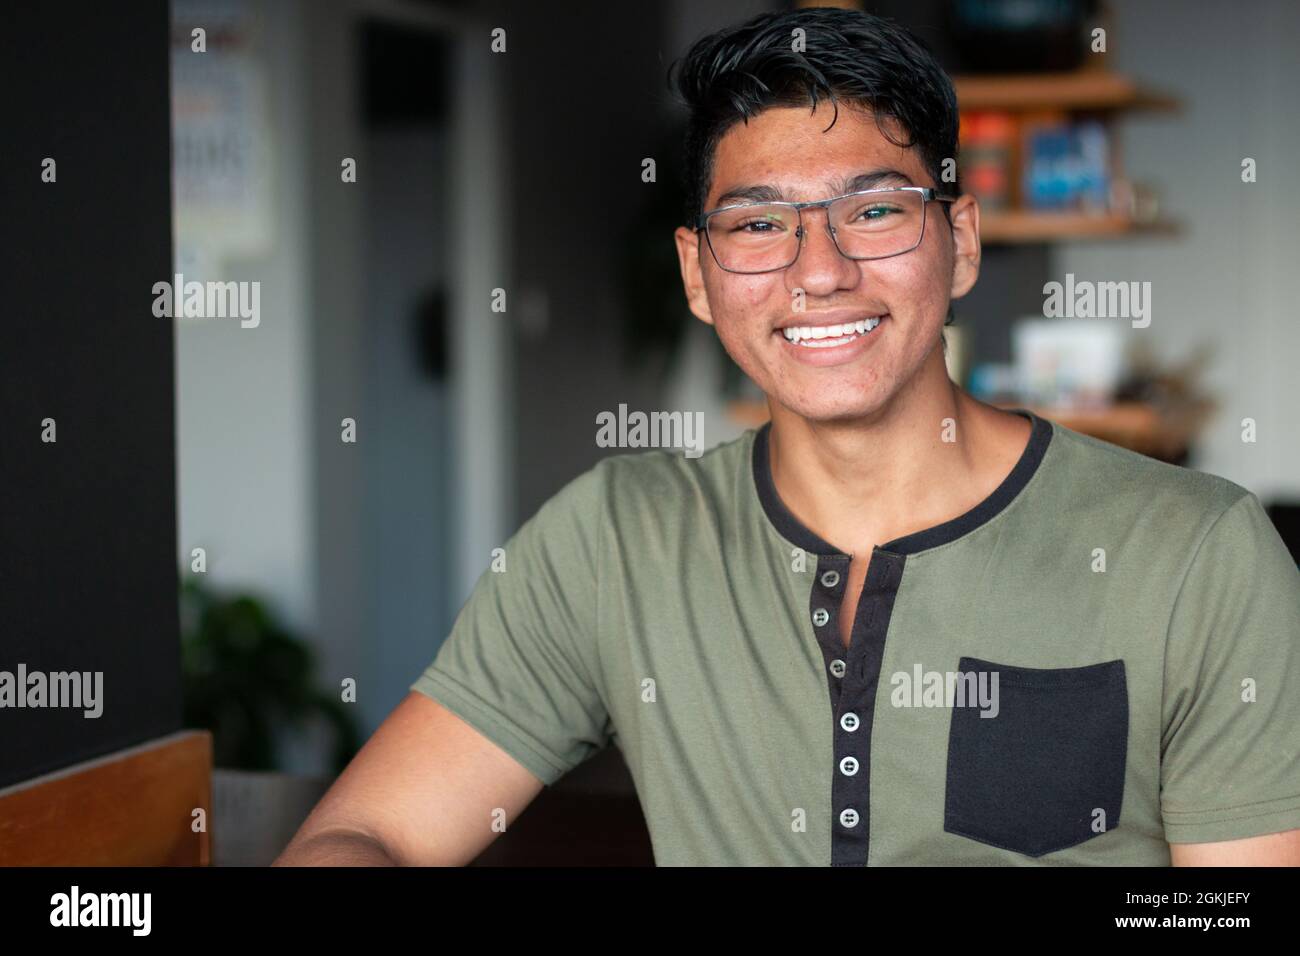 Adolescent man with glasses smiling and looking confident with acne on skin. Stock Photo